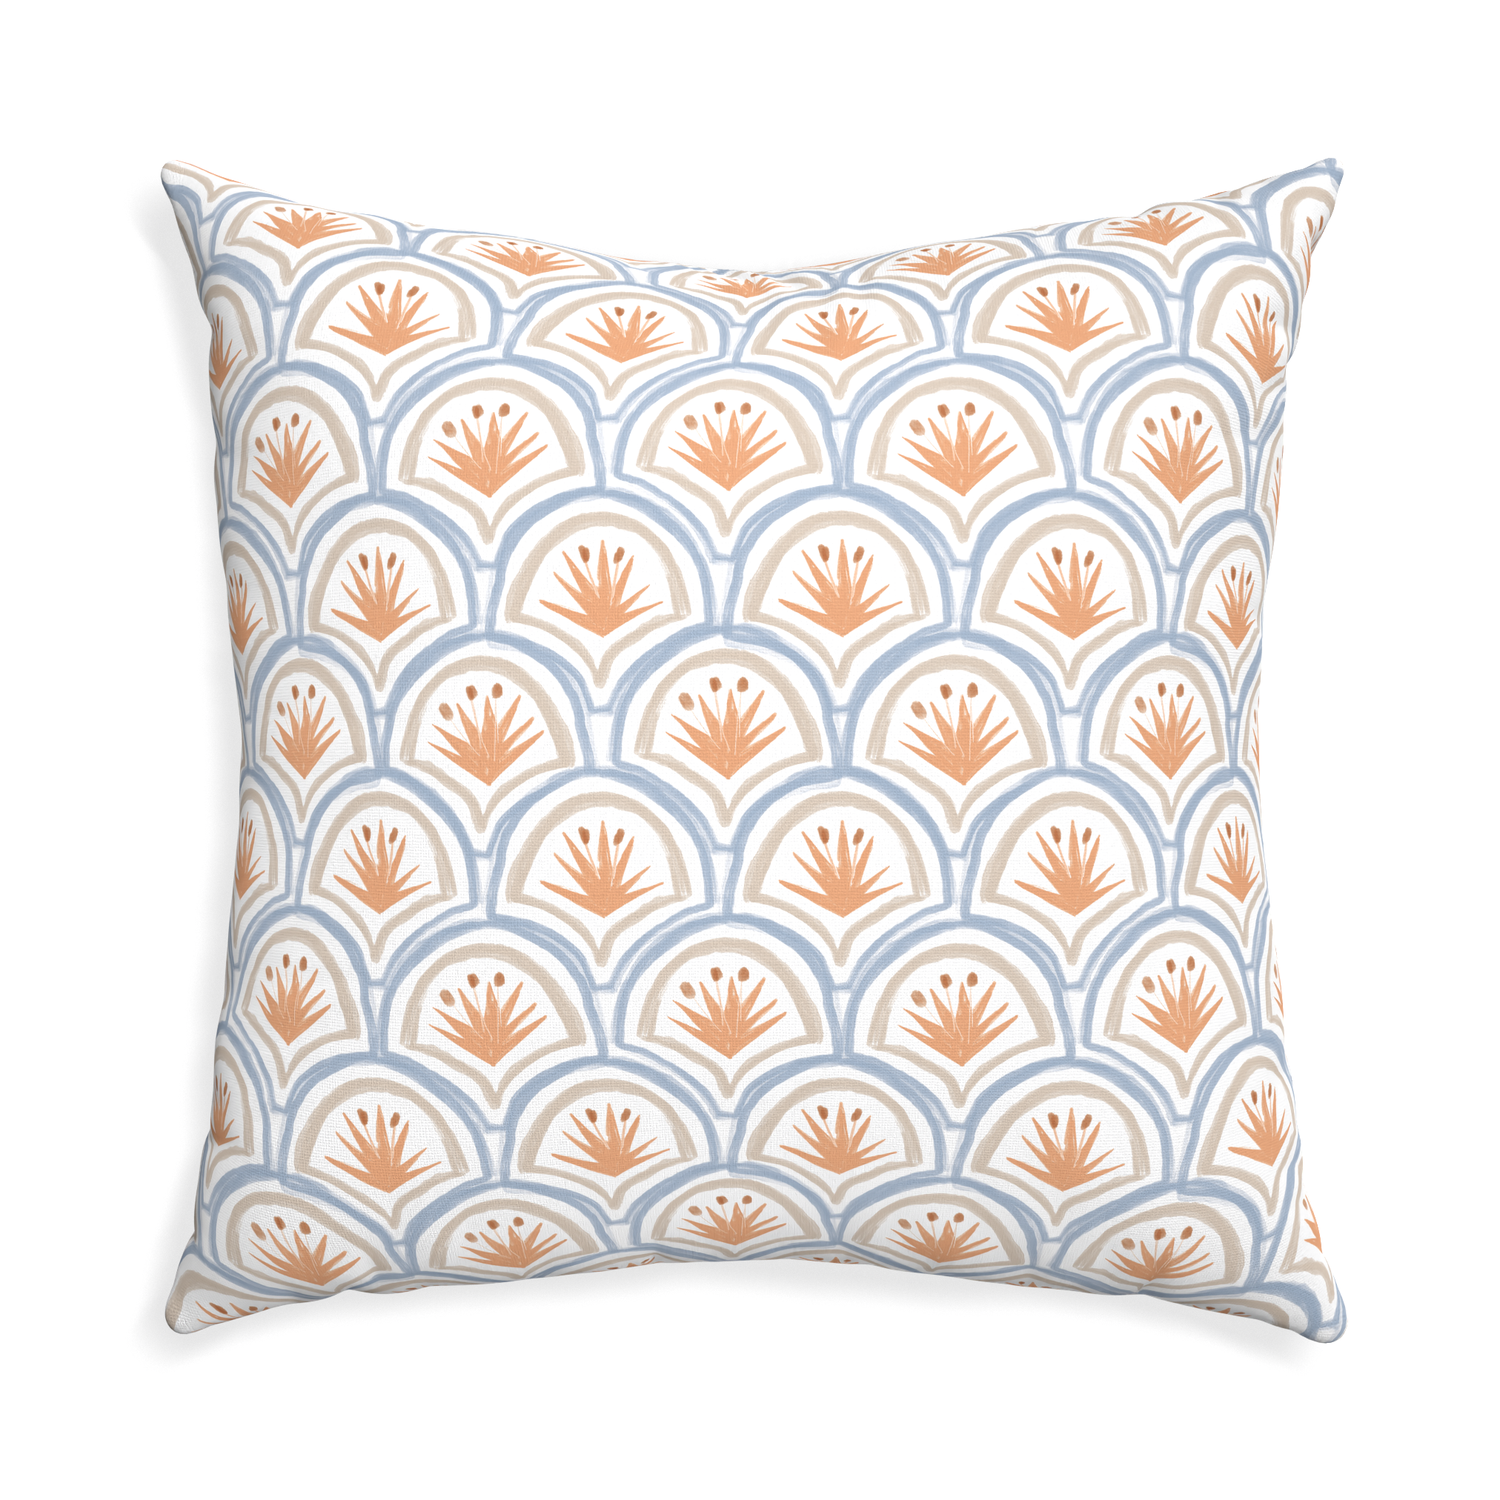 Euro-sham thatcher apricot custom art deco palm patternpillow with none on white background